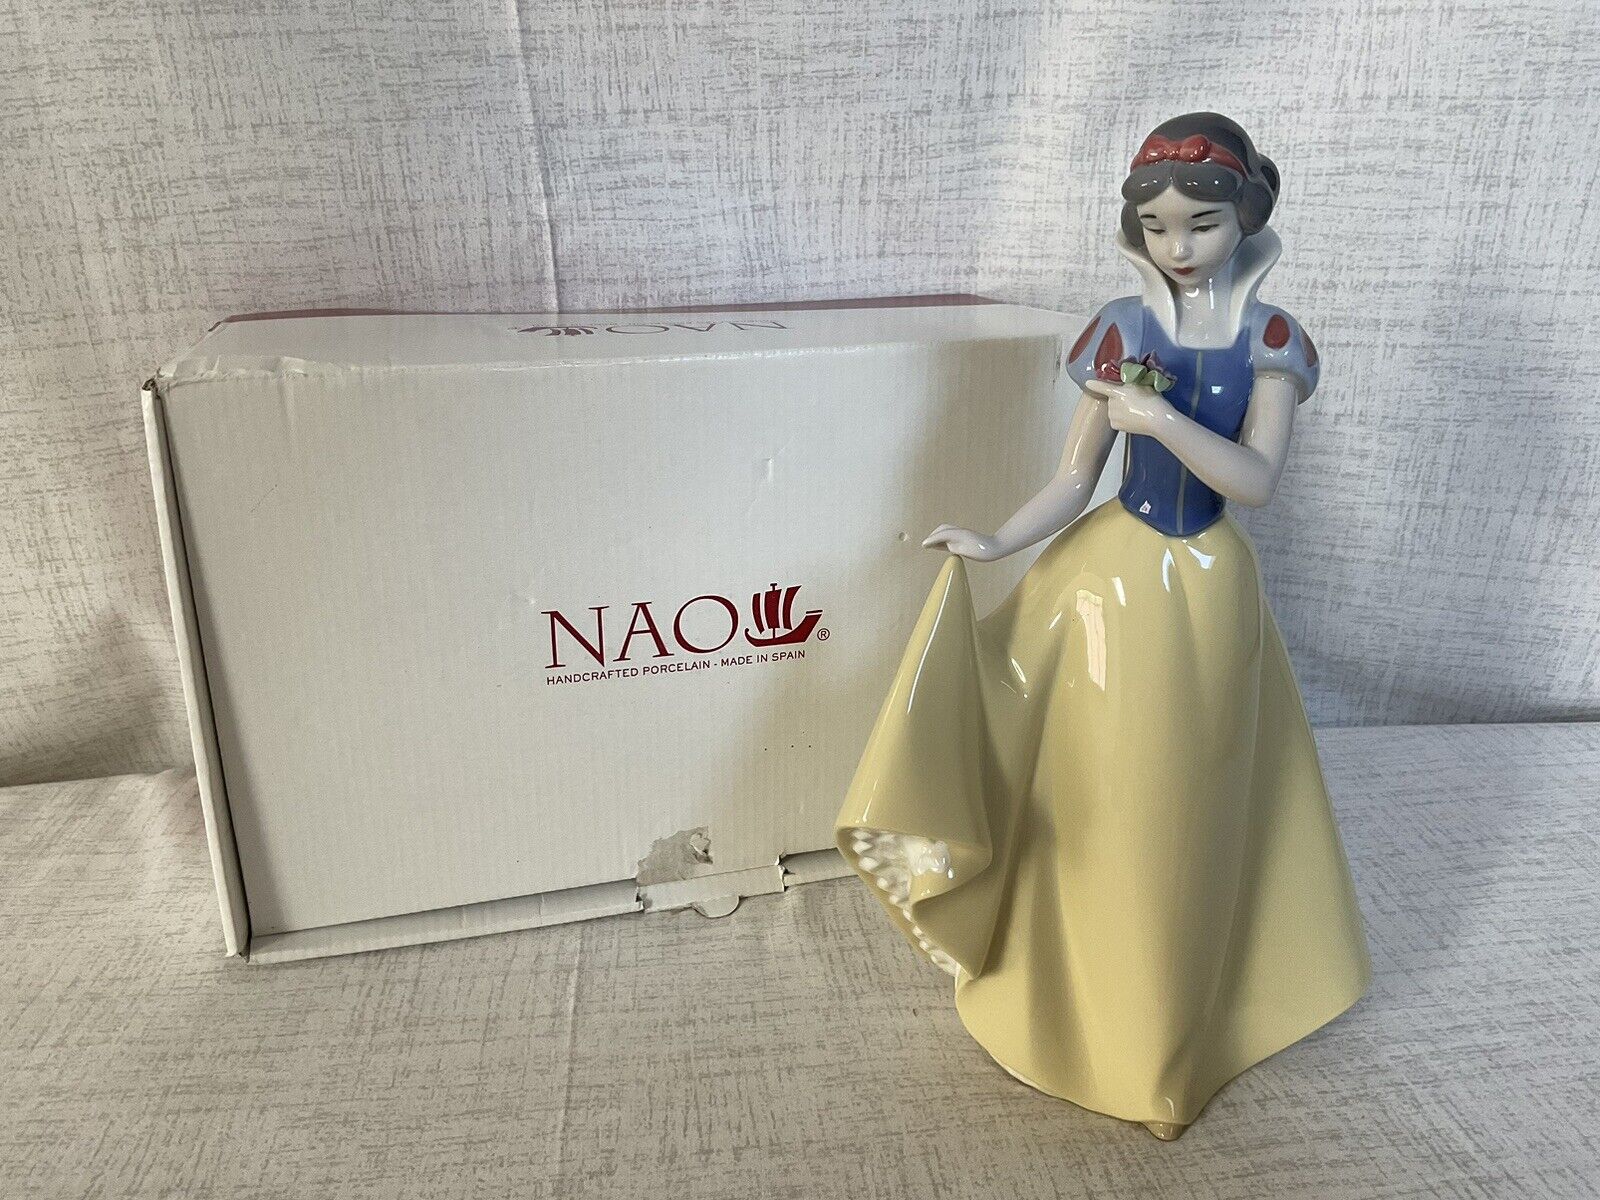 DISNEY NAO BY LLADRO SNOW WHITE HANDCRAFTED PORCELAIN MADE IN SPAIN FIGURINE 